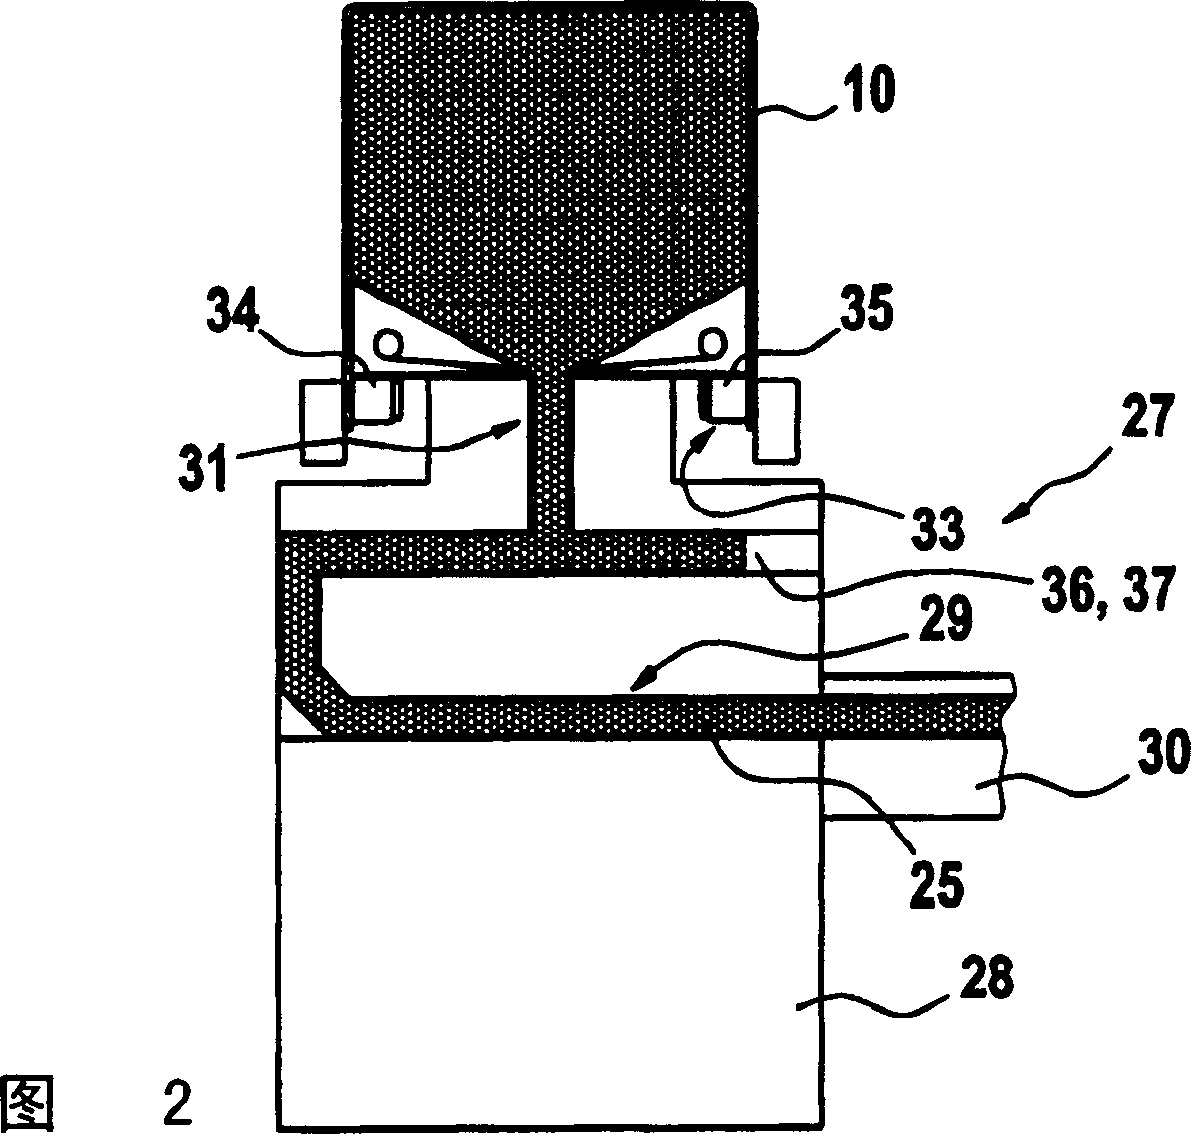 Storing apparatus for rod-shaped articles and apparatus and method for filling storing apparatuses